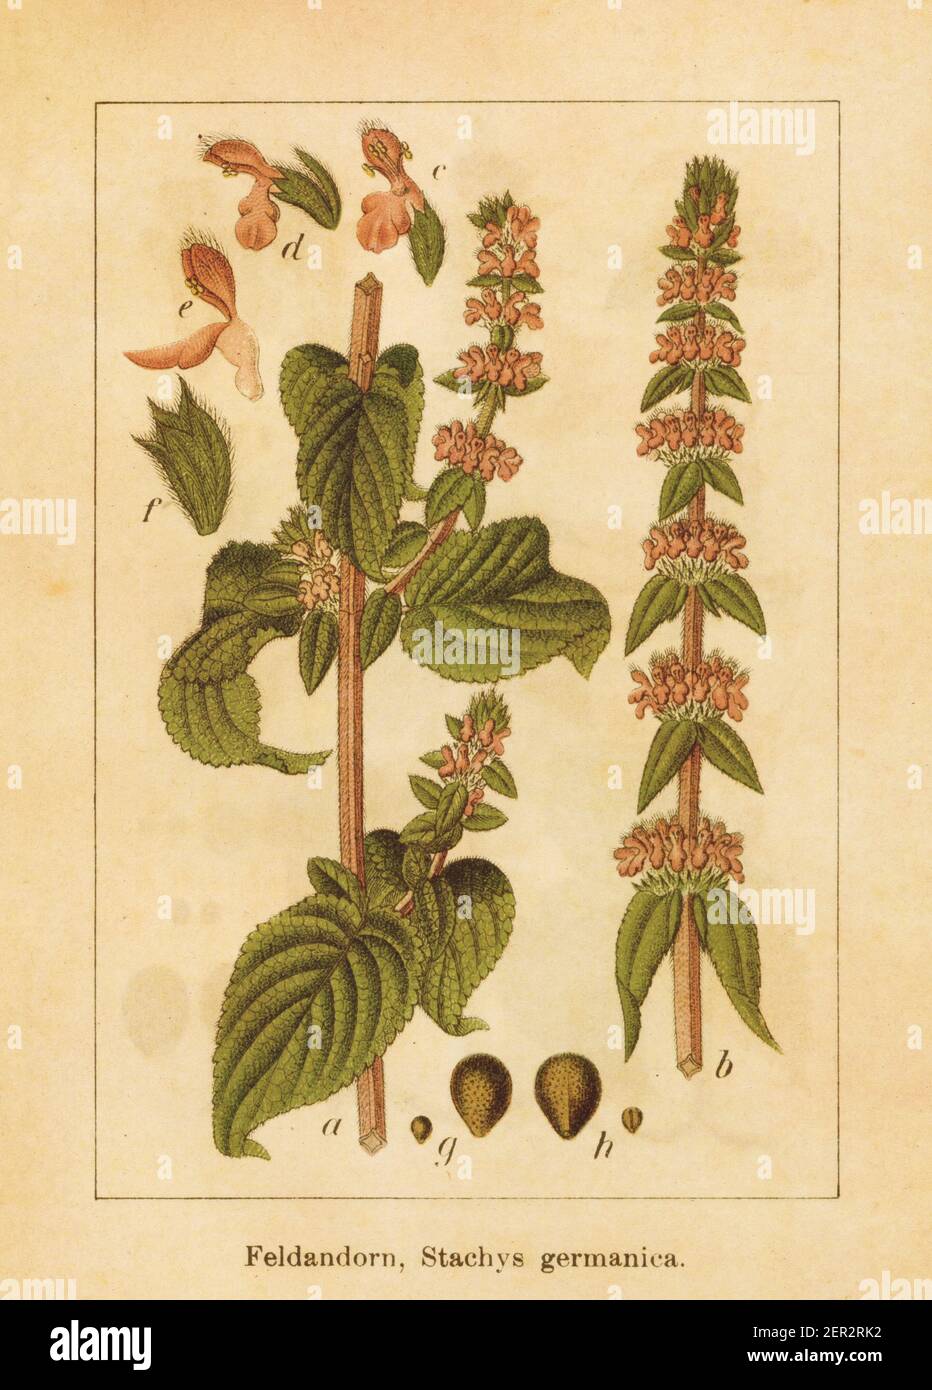 Antique illustration of a stachys germanica, also known as downy woundwort or German hedgenettle. Engraved by Jacob Sturm (1771-1848) and published in Stock Photo